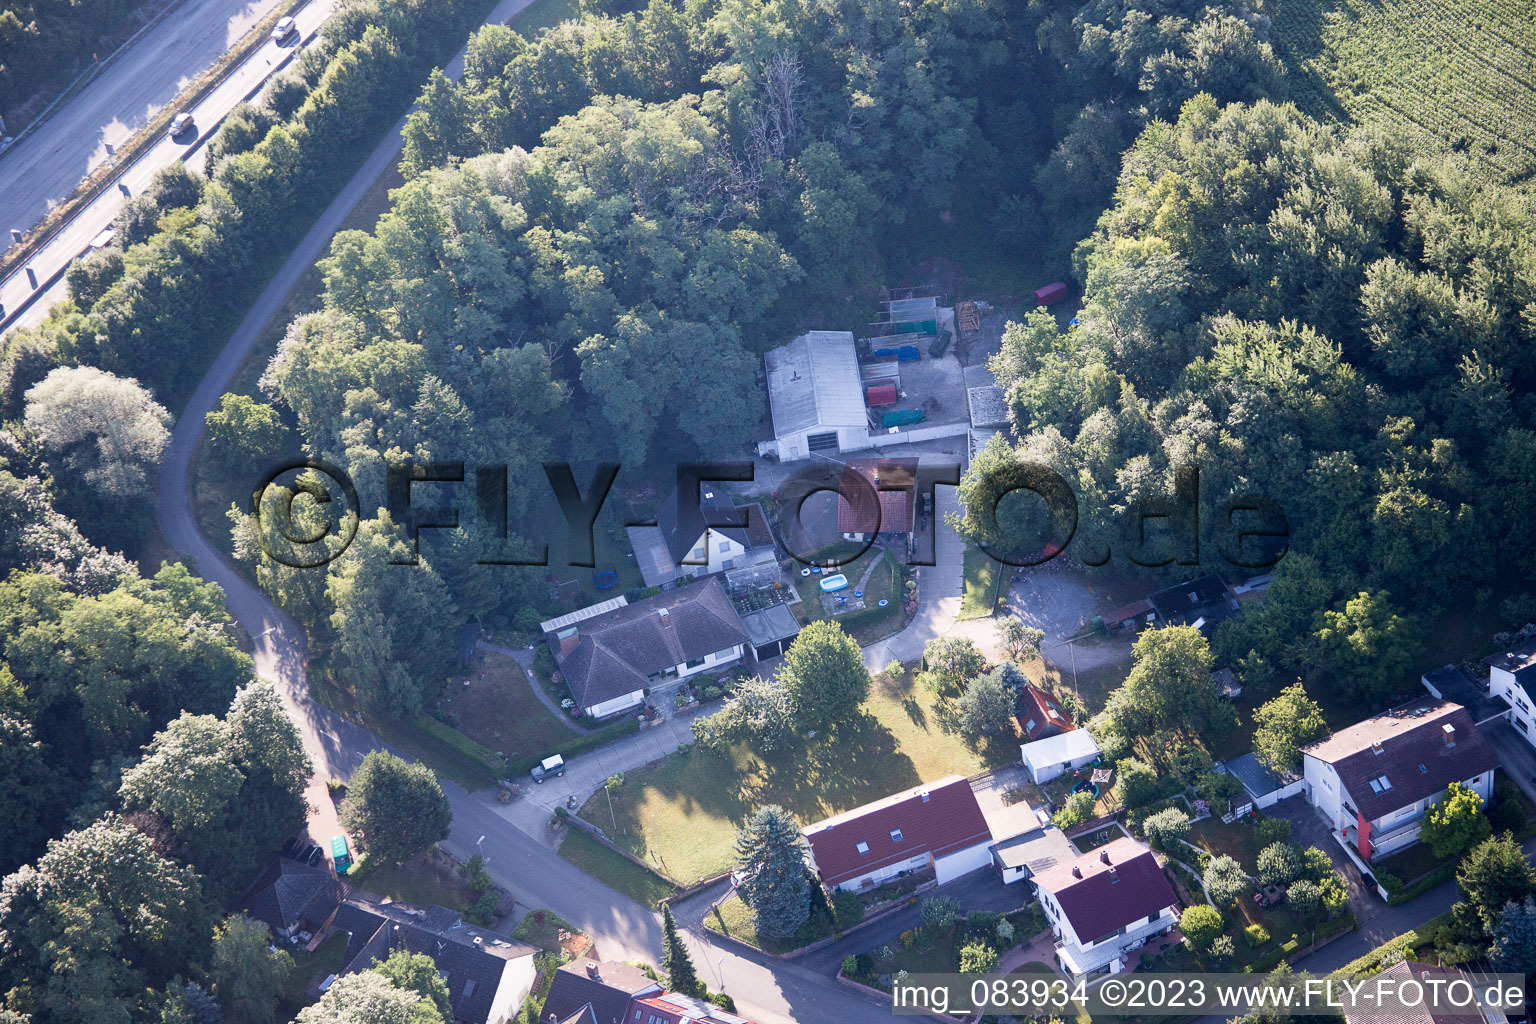 Hohenwettersbacherstraße 38, "open youth workshop Karlsruhe" at the quarry in the district Grünwettersbach in Karlsruhe in the state Baden-Wuerttemberg, Germany from a drone